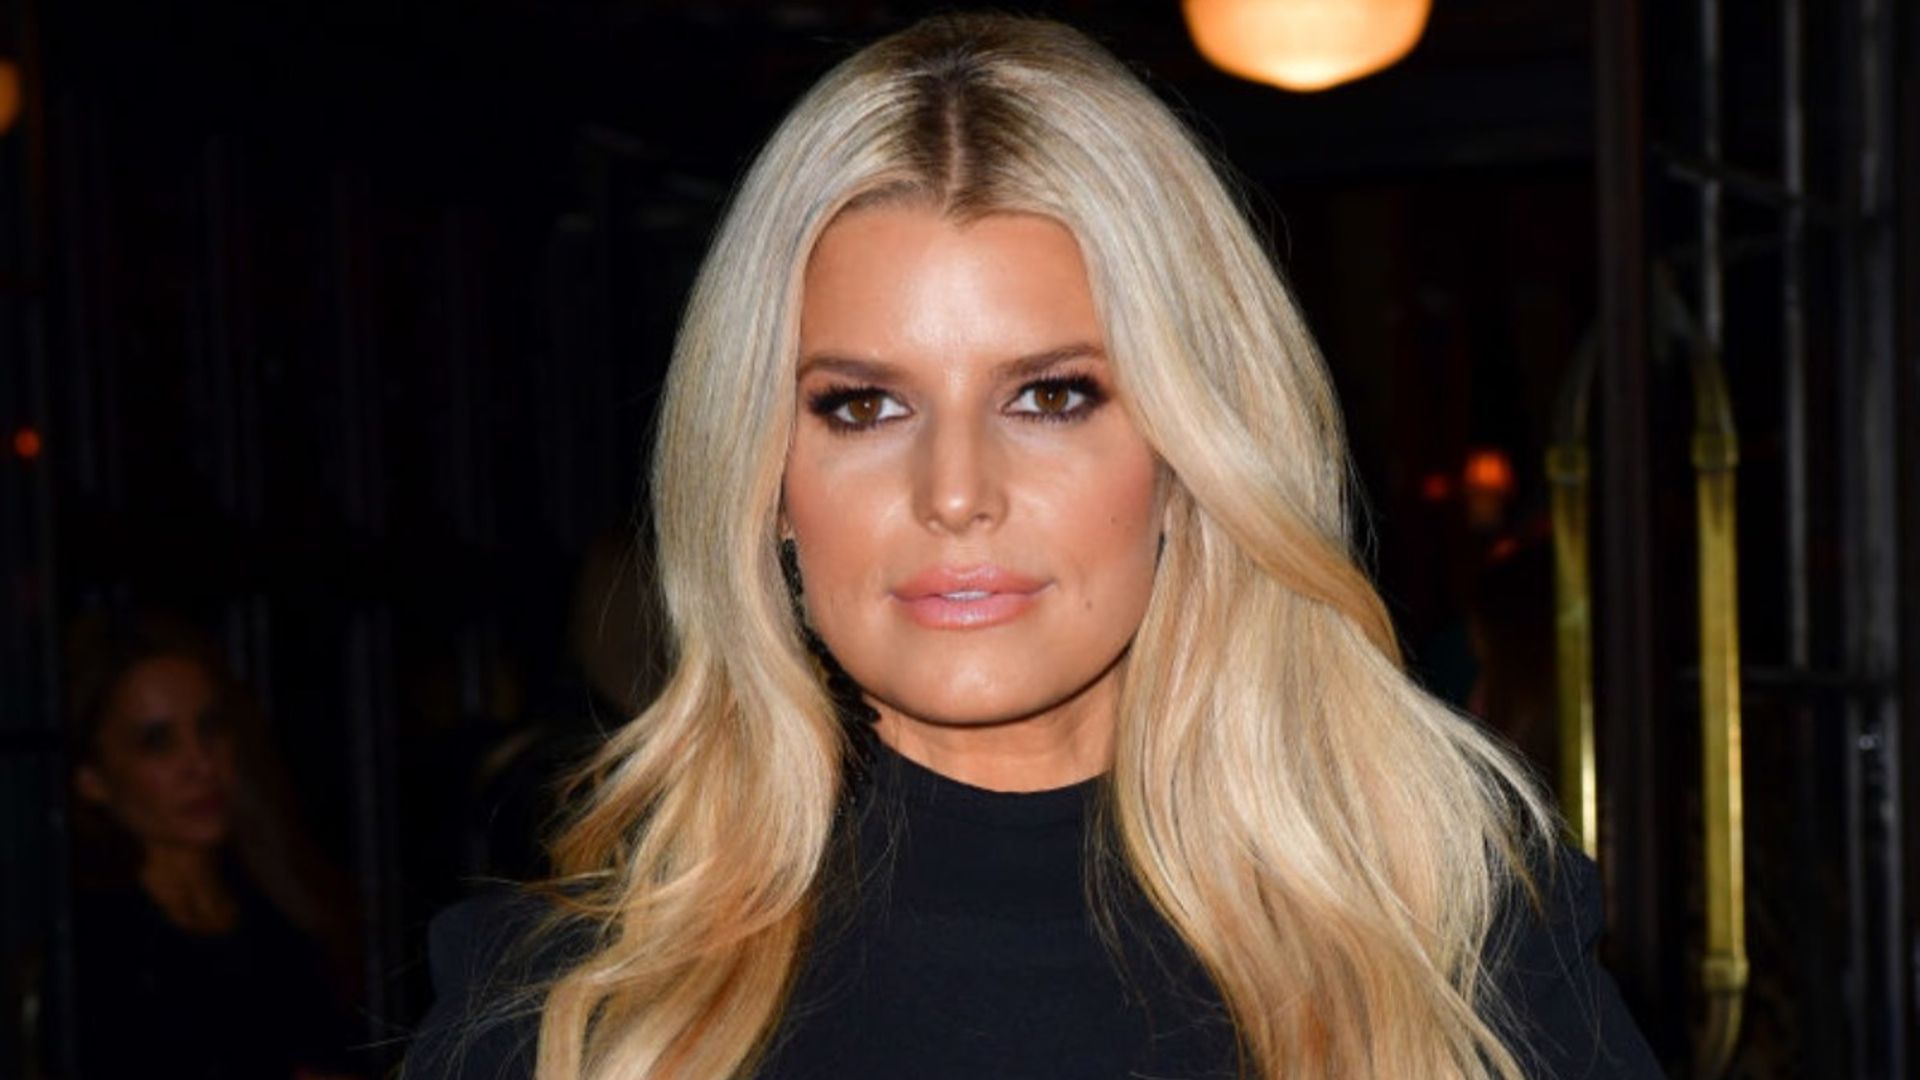 Jessica Simpson's children look identical to her in gorgeous back-to-school photo